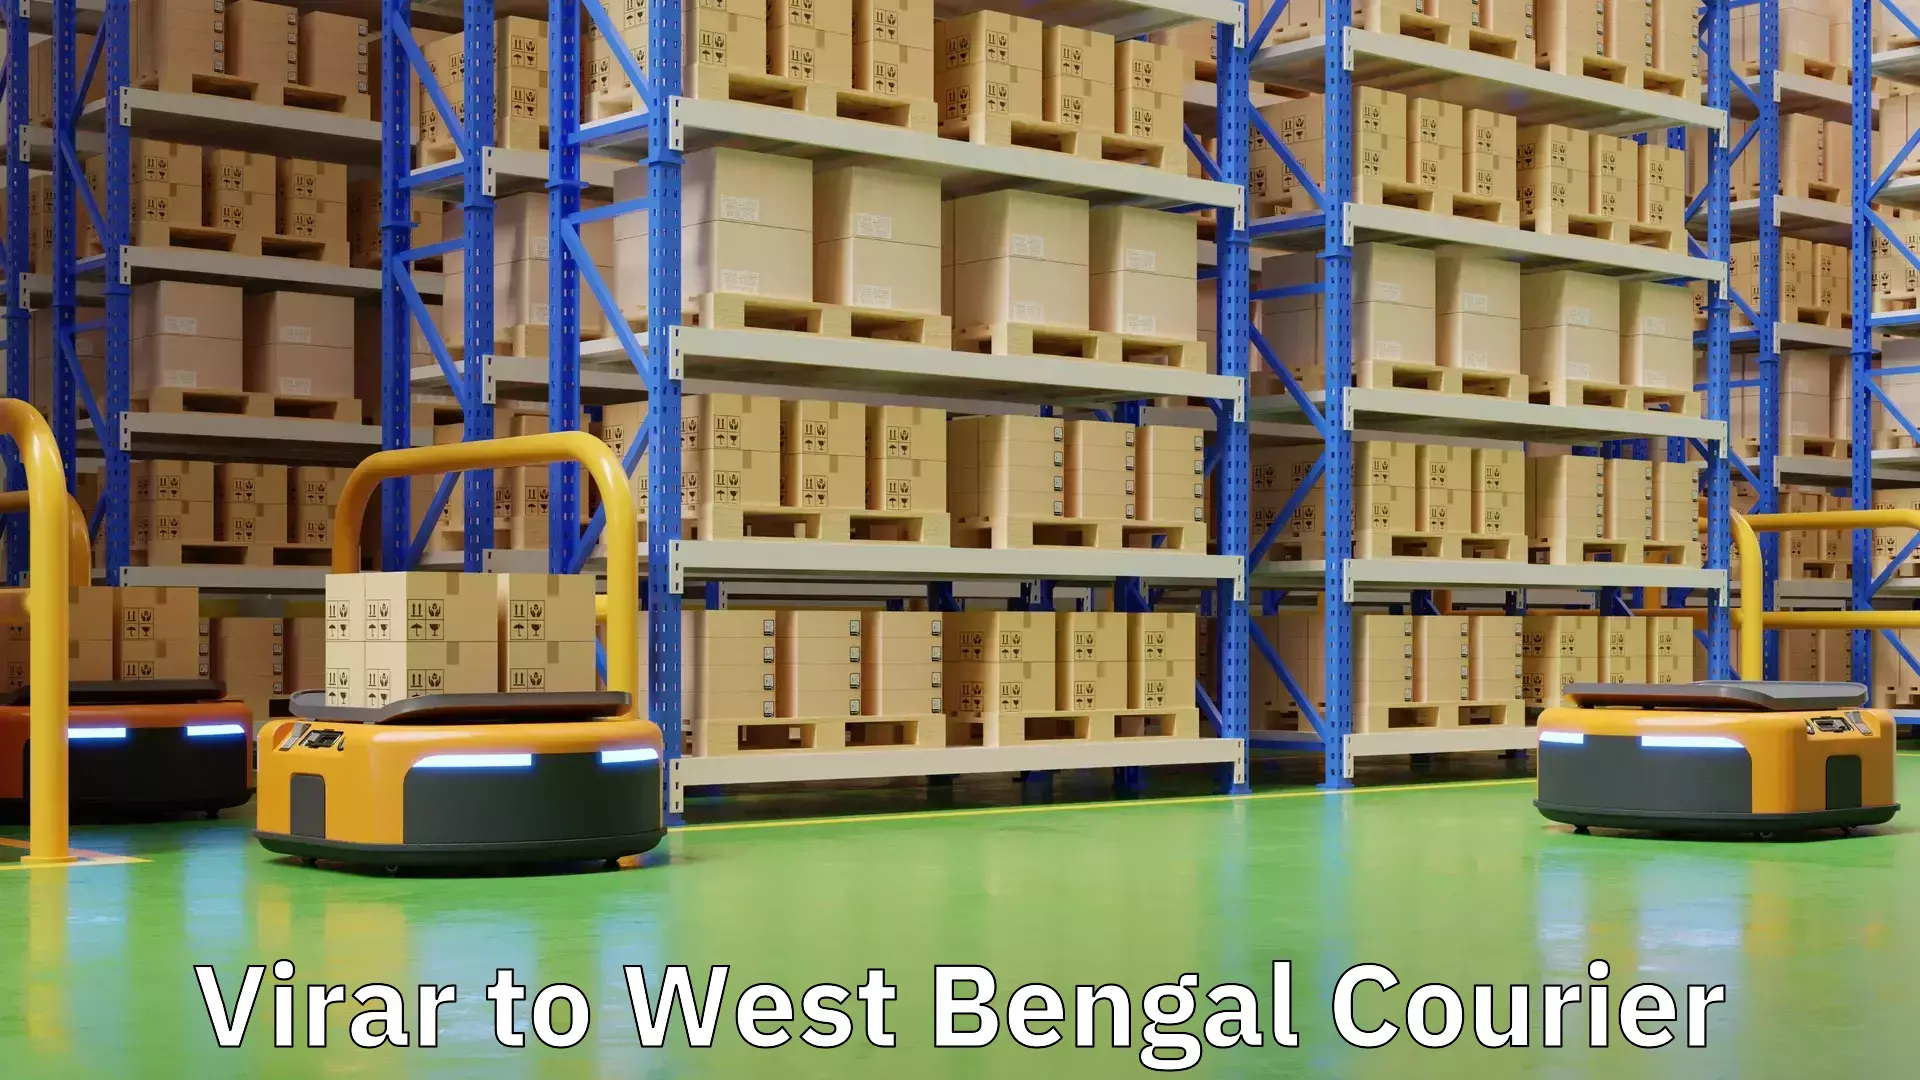 Multi-national courier services Virar to West Bengal